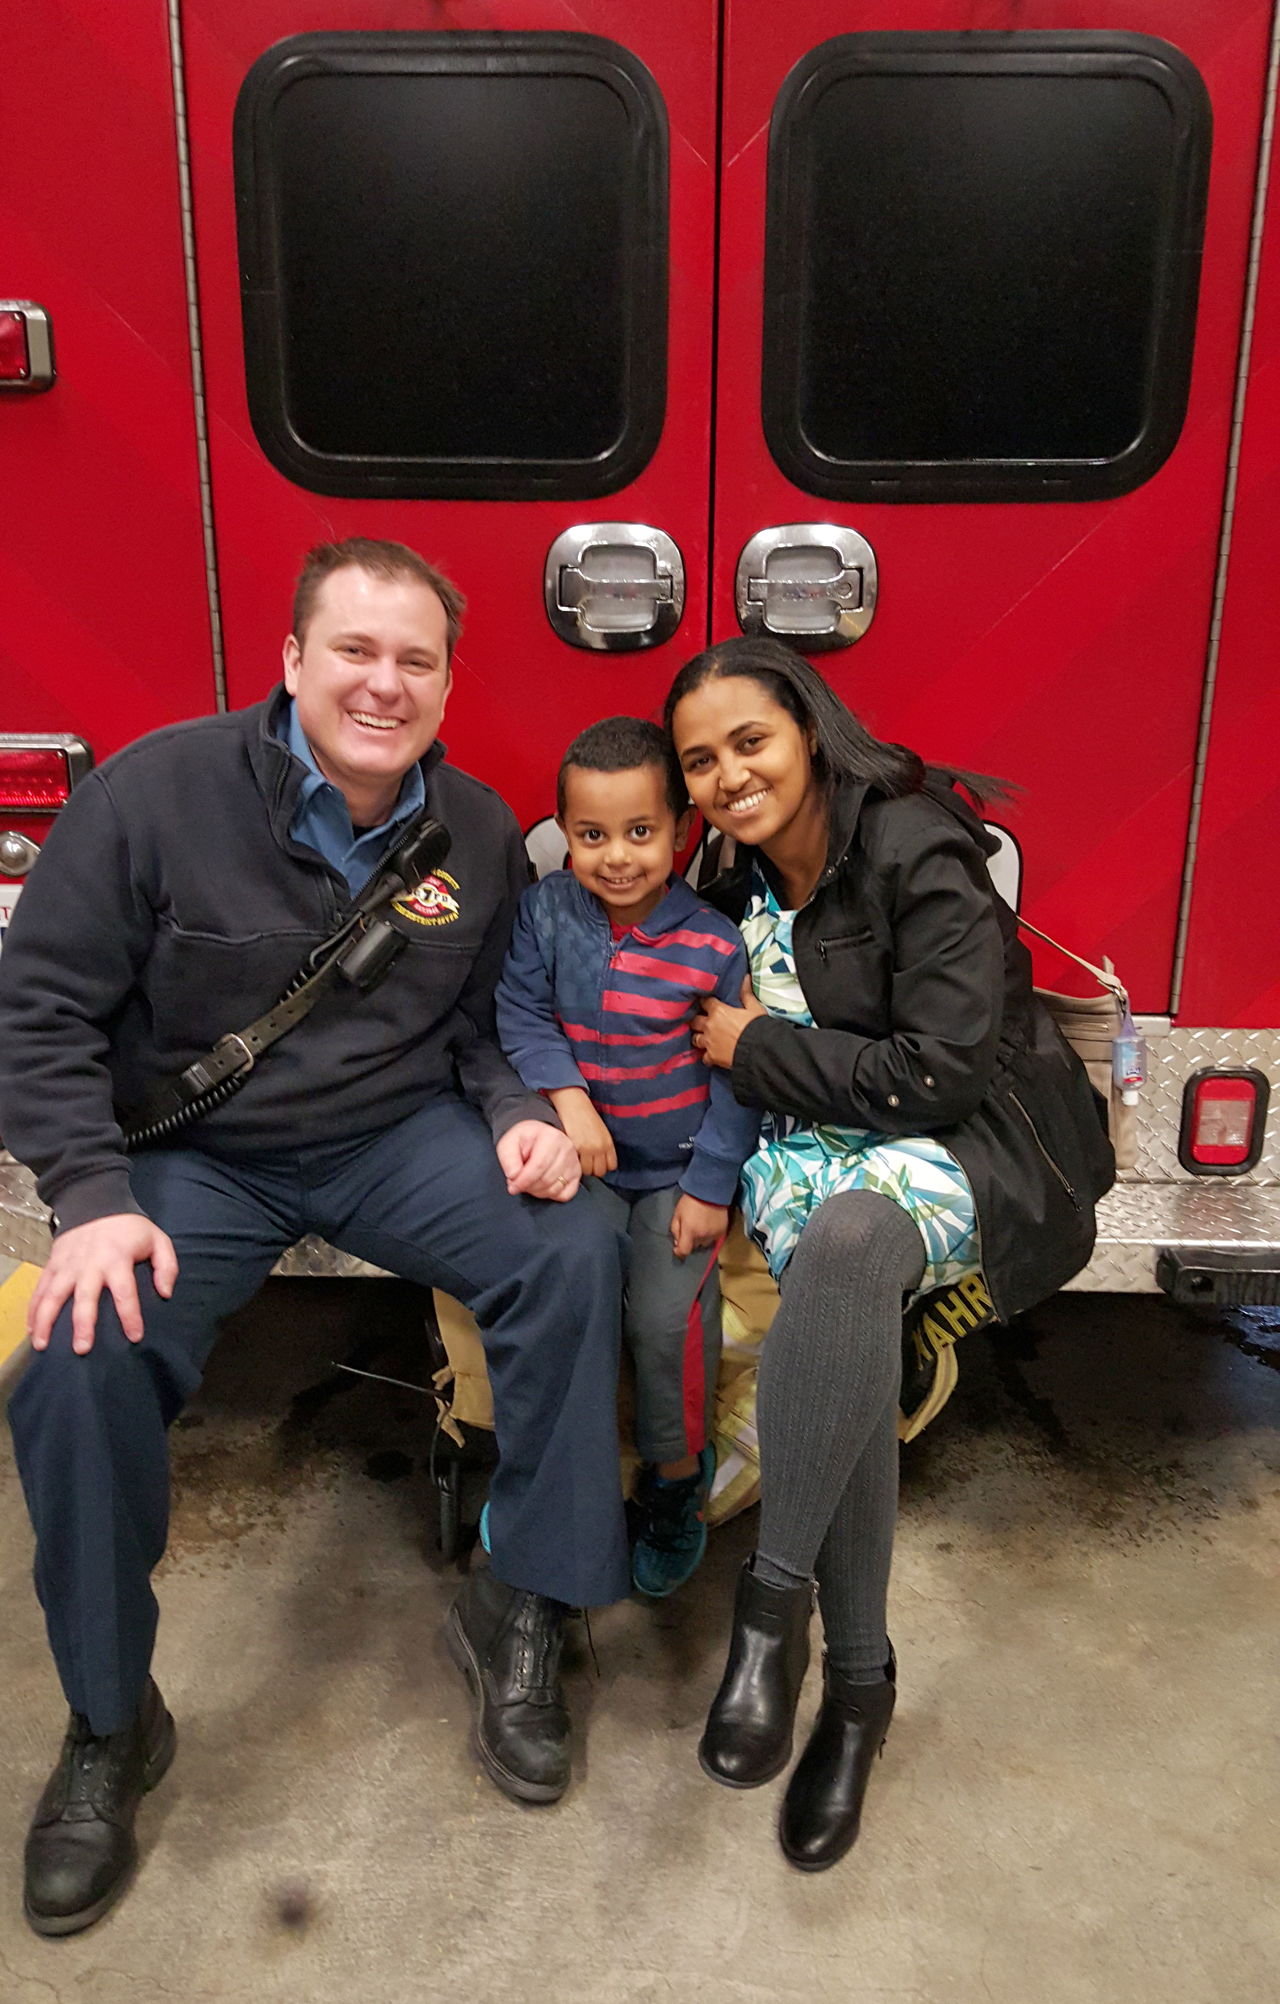 Snohomish County Fire District 7 paramedic Troy Smith reunites in January with Hosana Hailu, 36, and her son, Nolawi, 5. Smith helped Hailu deliver Nolawi in an ambulance in 2011.